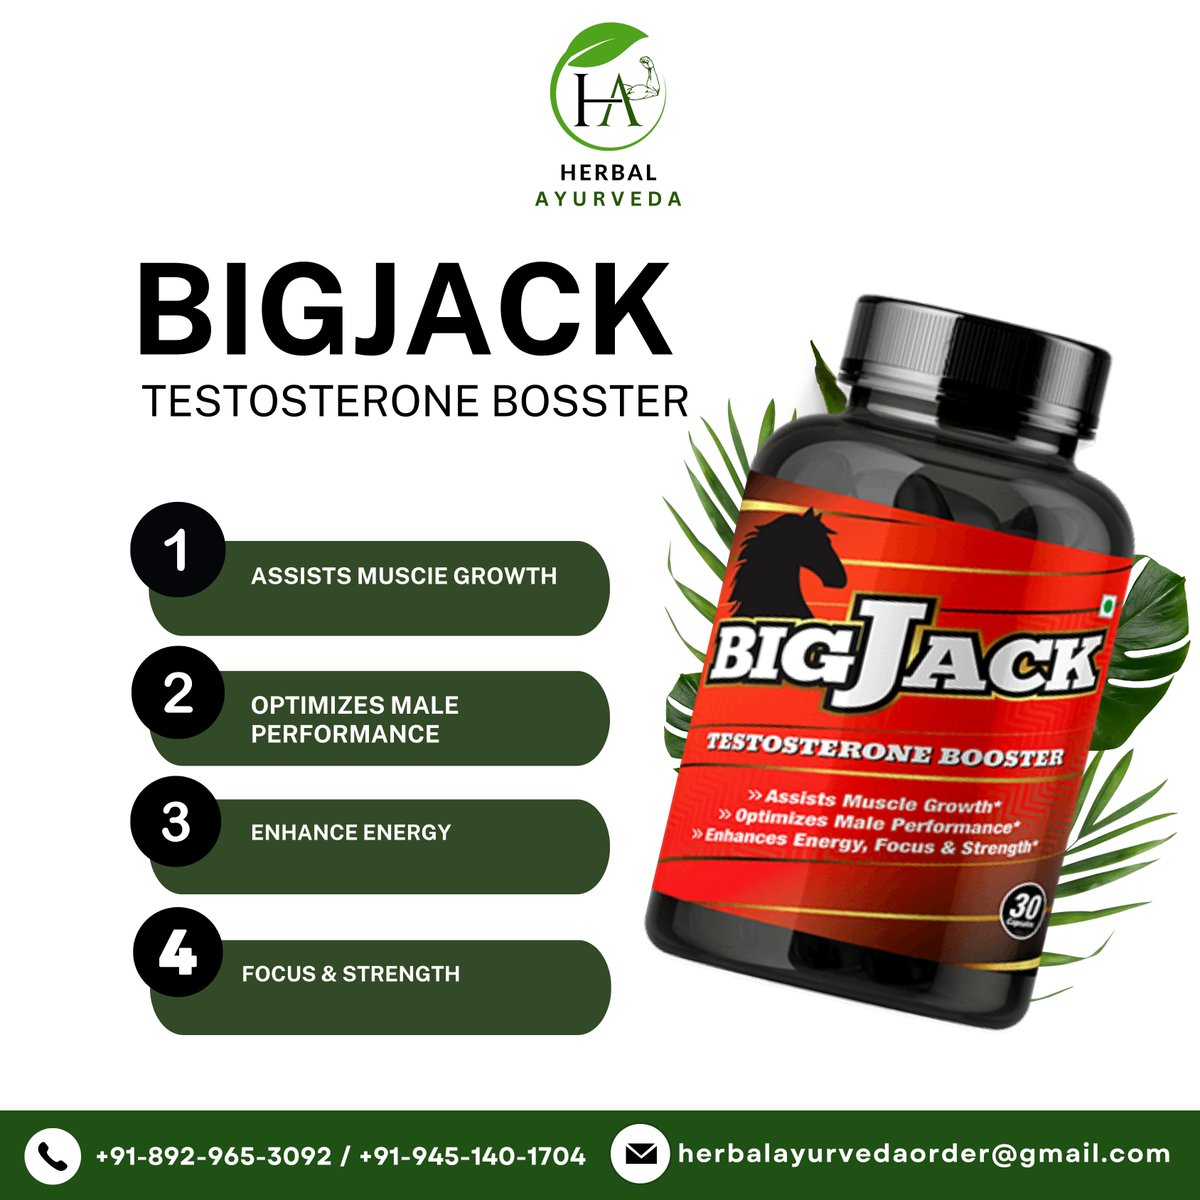 With the help of our Big Jack testosterone booster, realize your full potential! Achieve New Heights in Strength, Stamina, and Confidence!

#BigJack #TestosteroneBooster #RealizeYourPotential #StrengthAndStamina #ConfidenceBoost #NaturalIngredients #ZincBenefits #DHEA #VitaminD